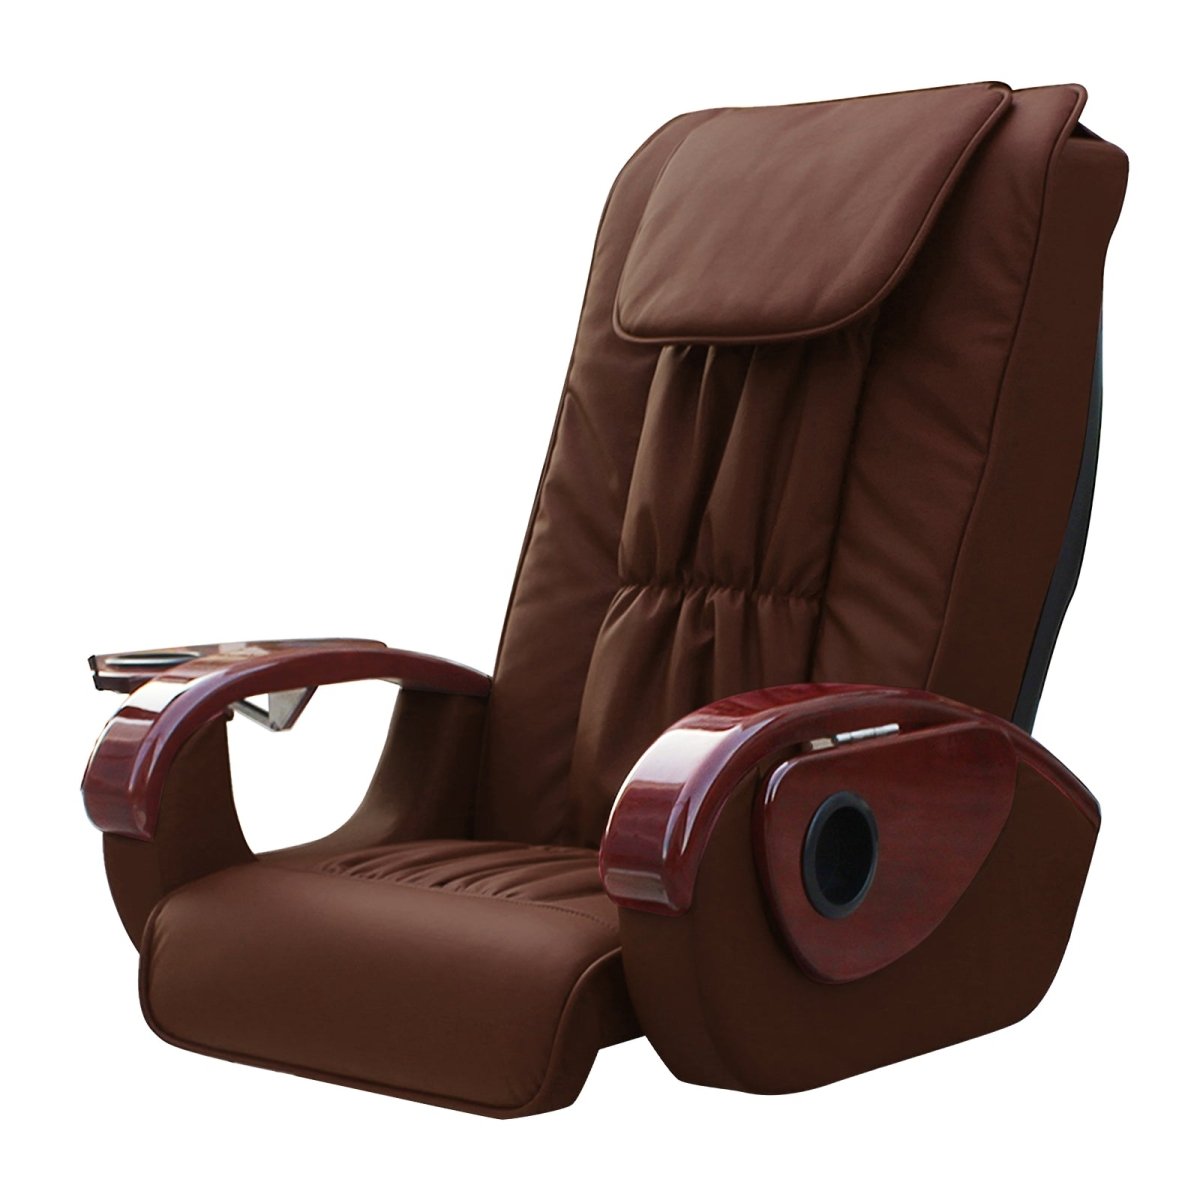 Pedicure Massage Chair S813 - GreenLife-Pedicure Chair